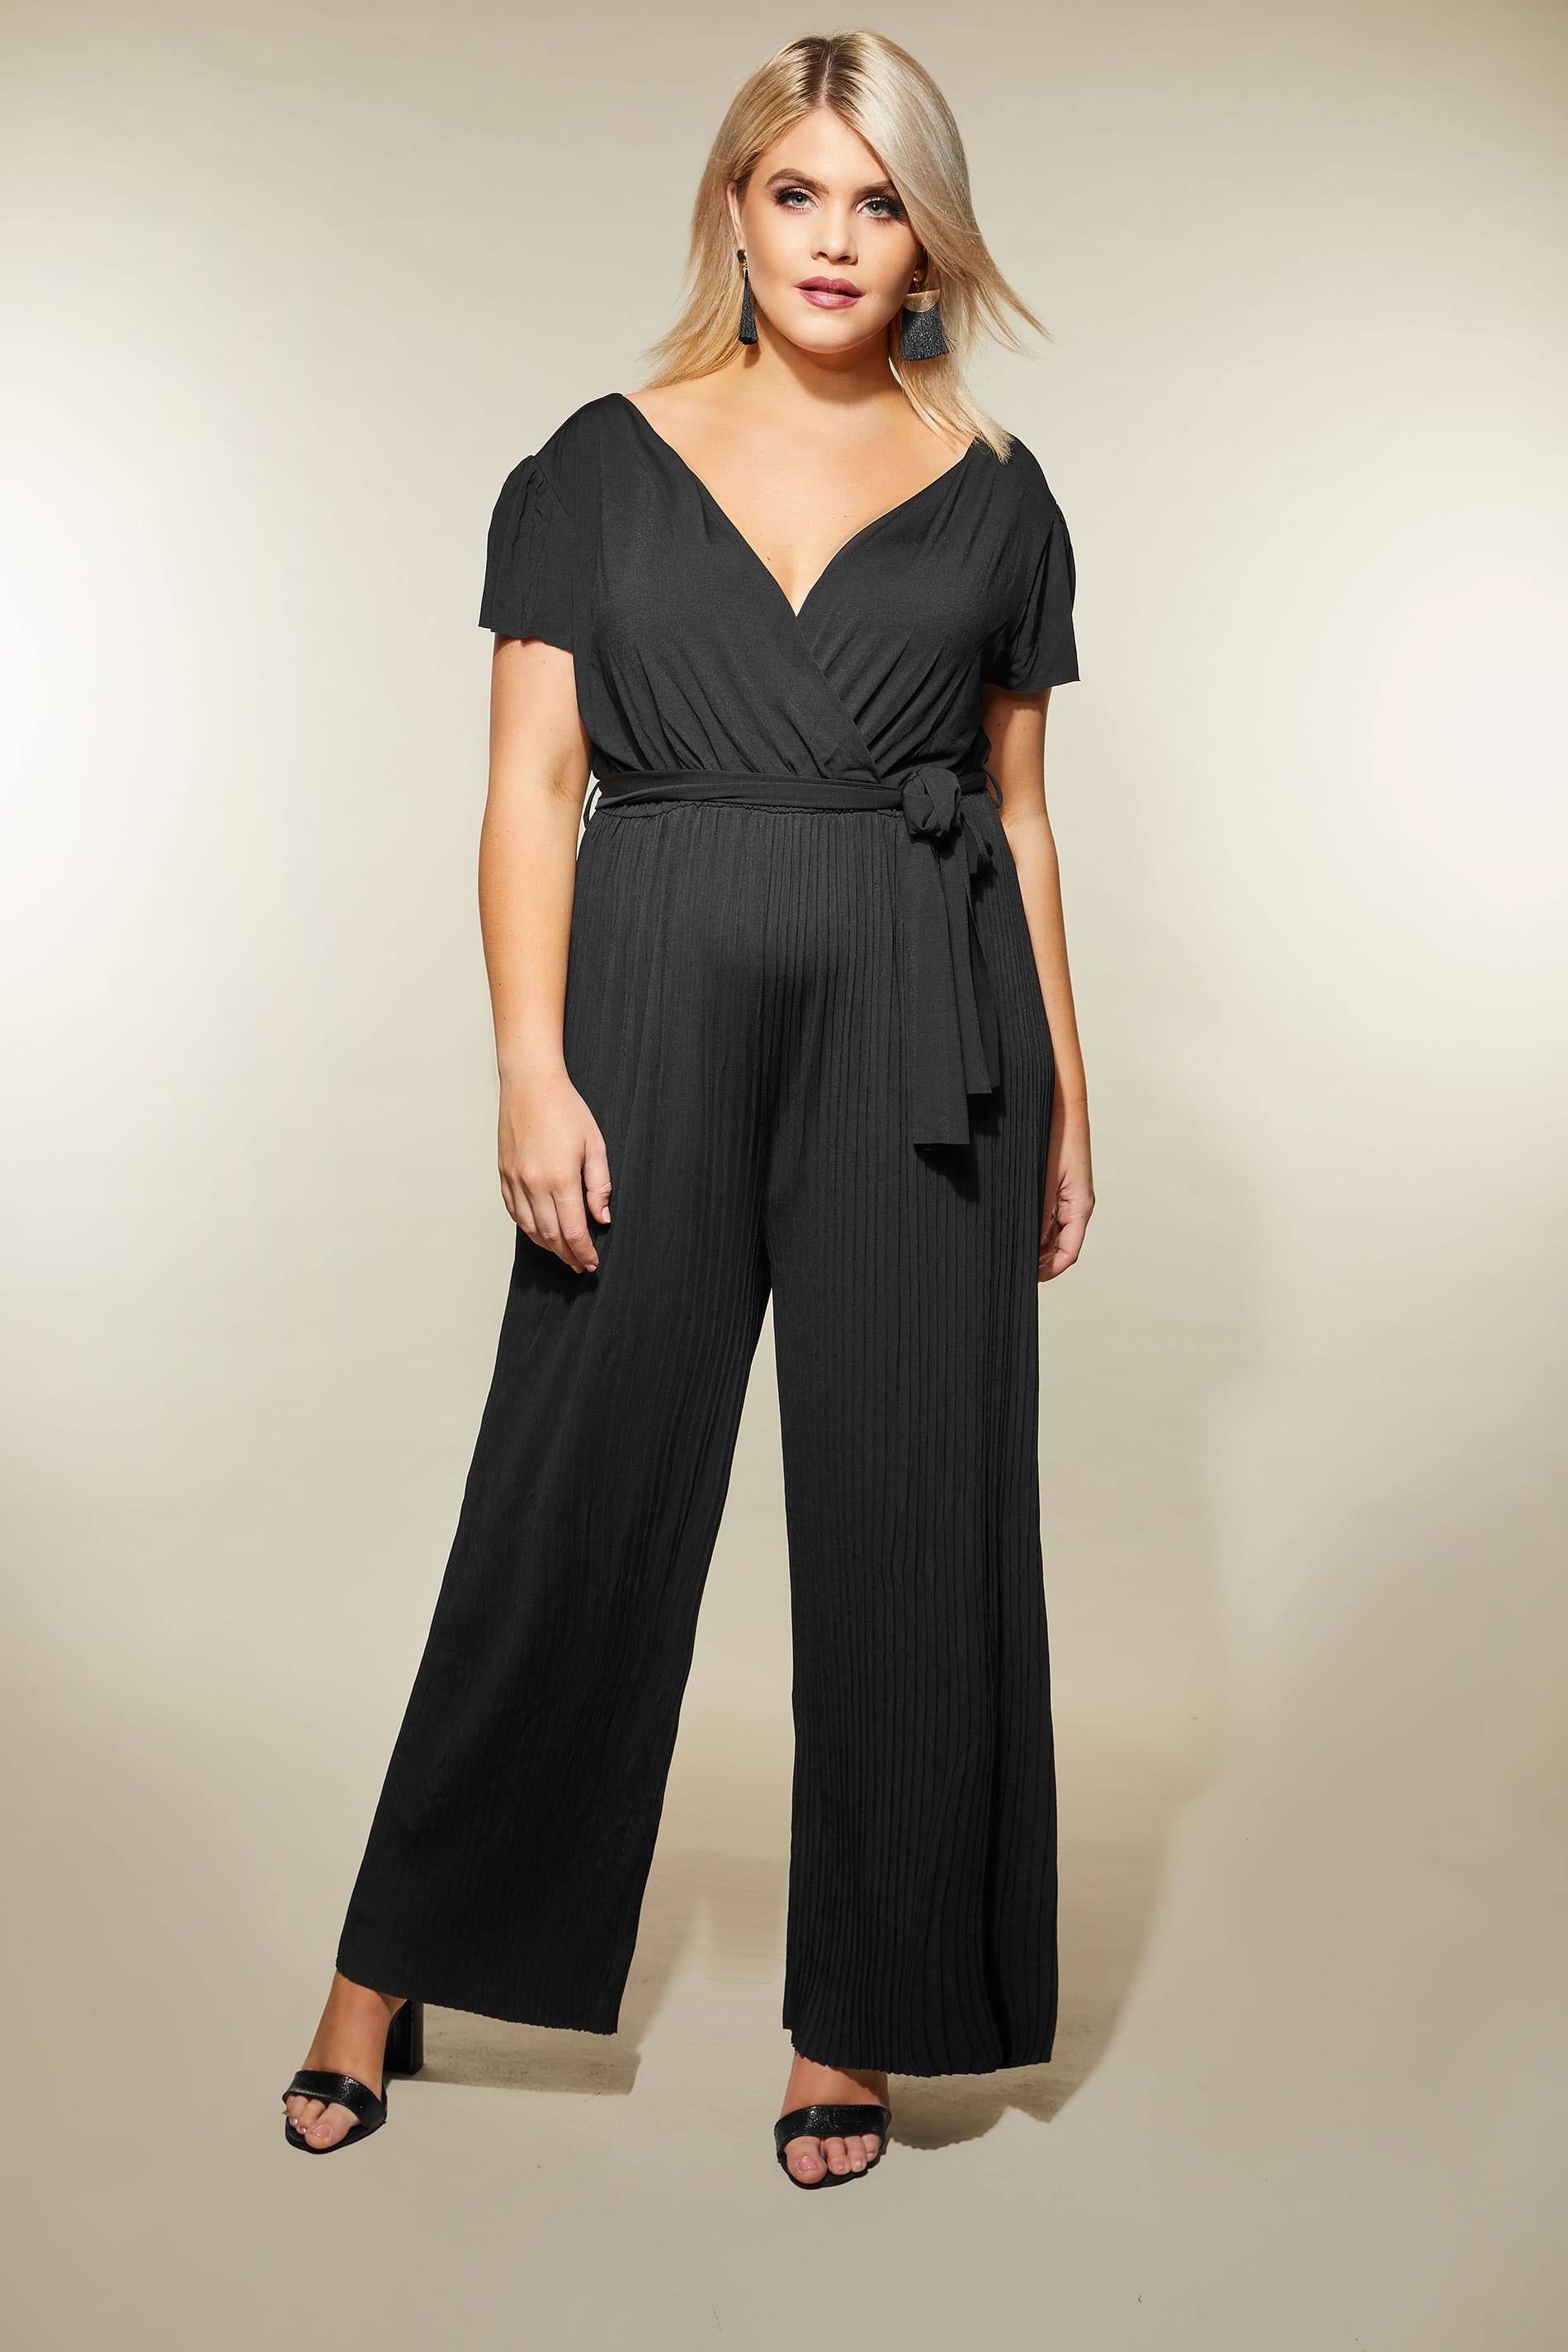 AX PARIS CURVE Black Pleated Jumpsuit With Cap Sleeves, Plus size 16 to 26